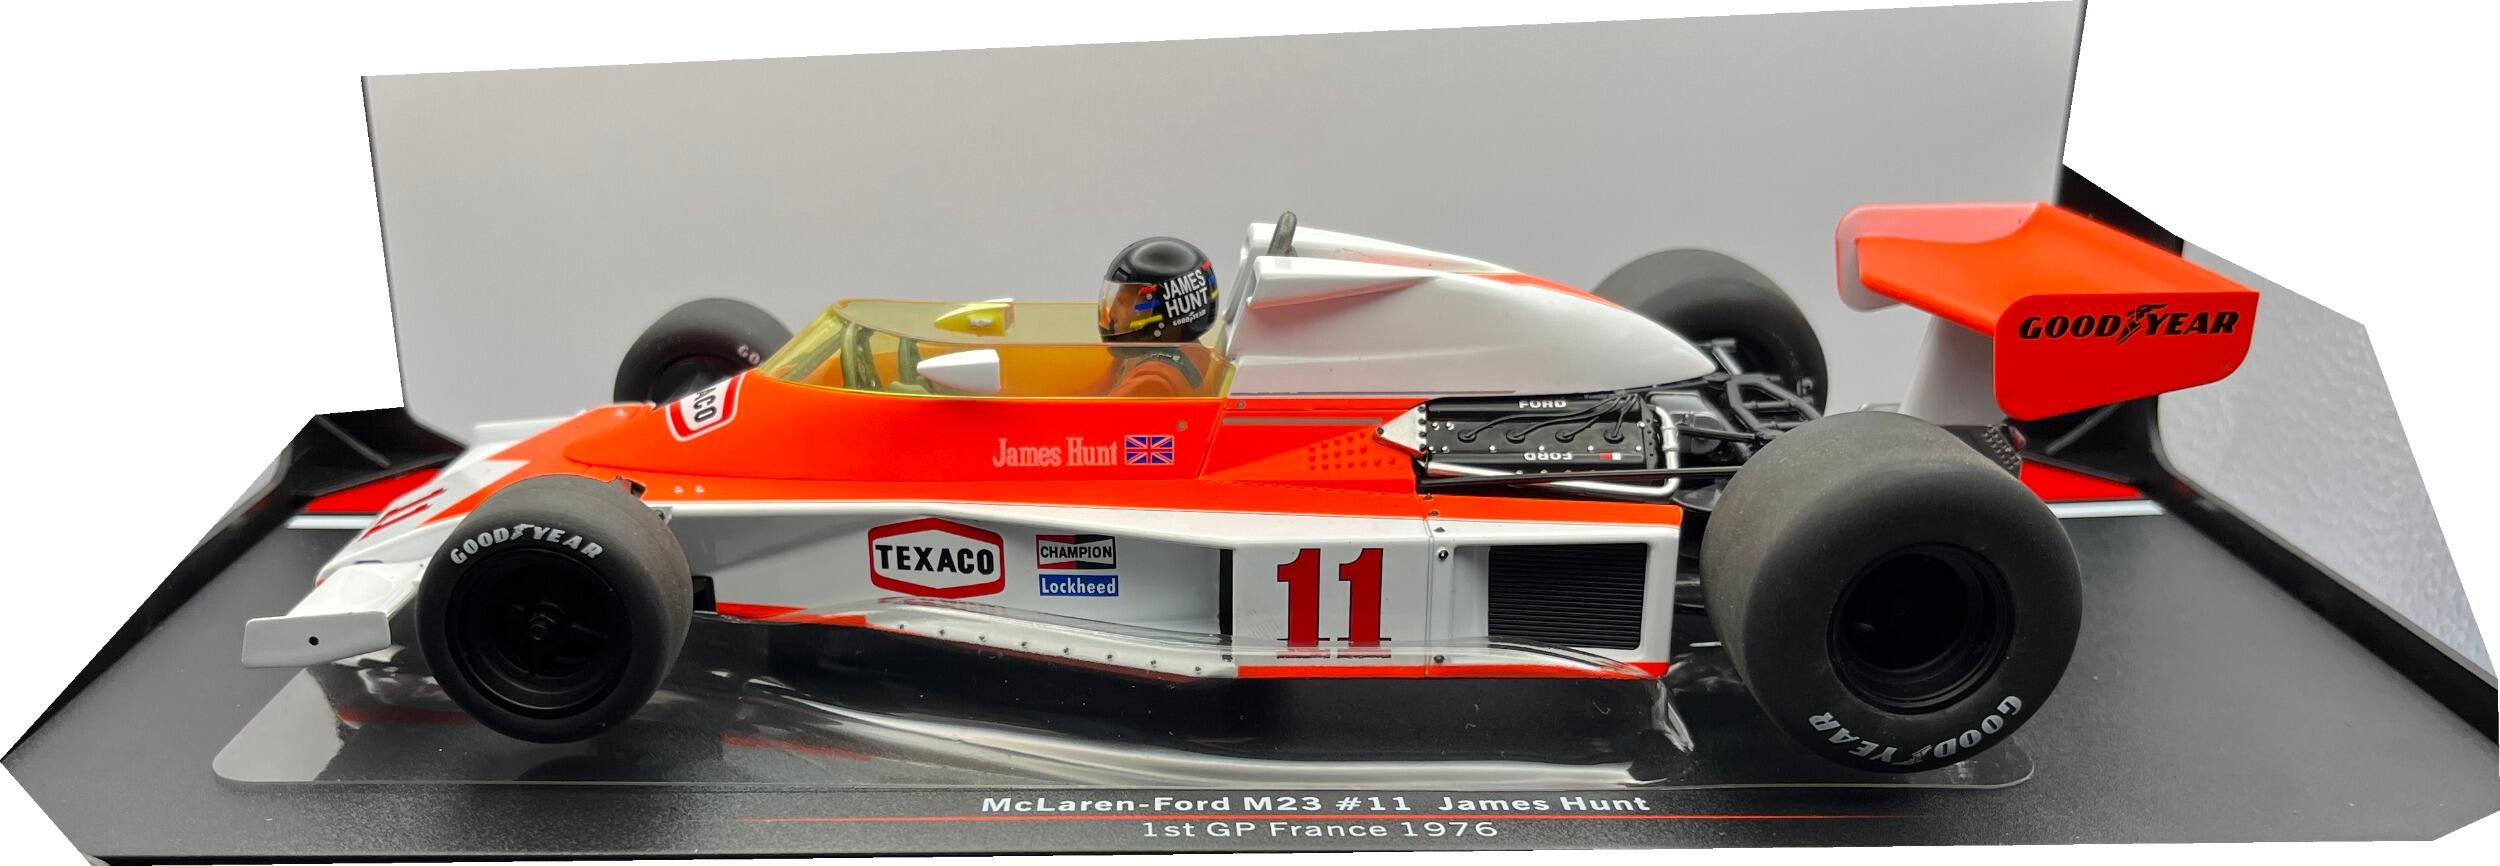 1:18 scale Race, Rally and F1 model cars